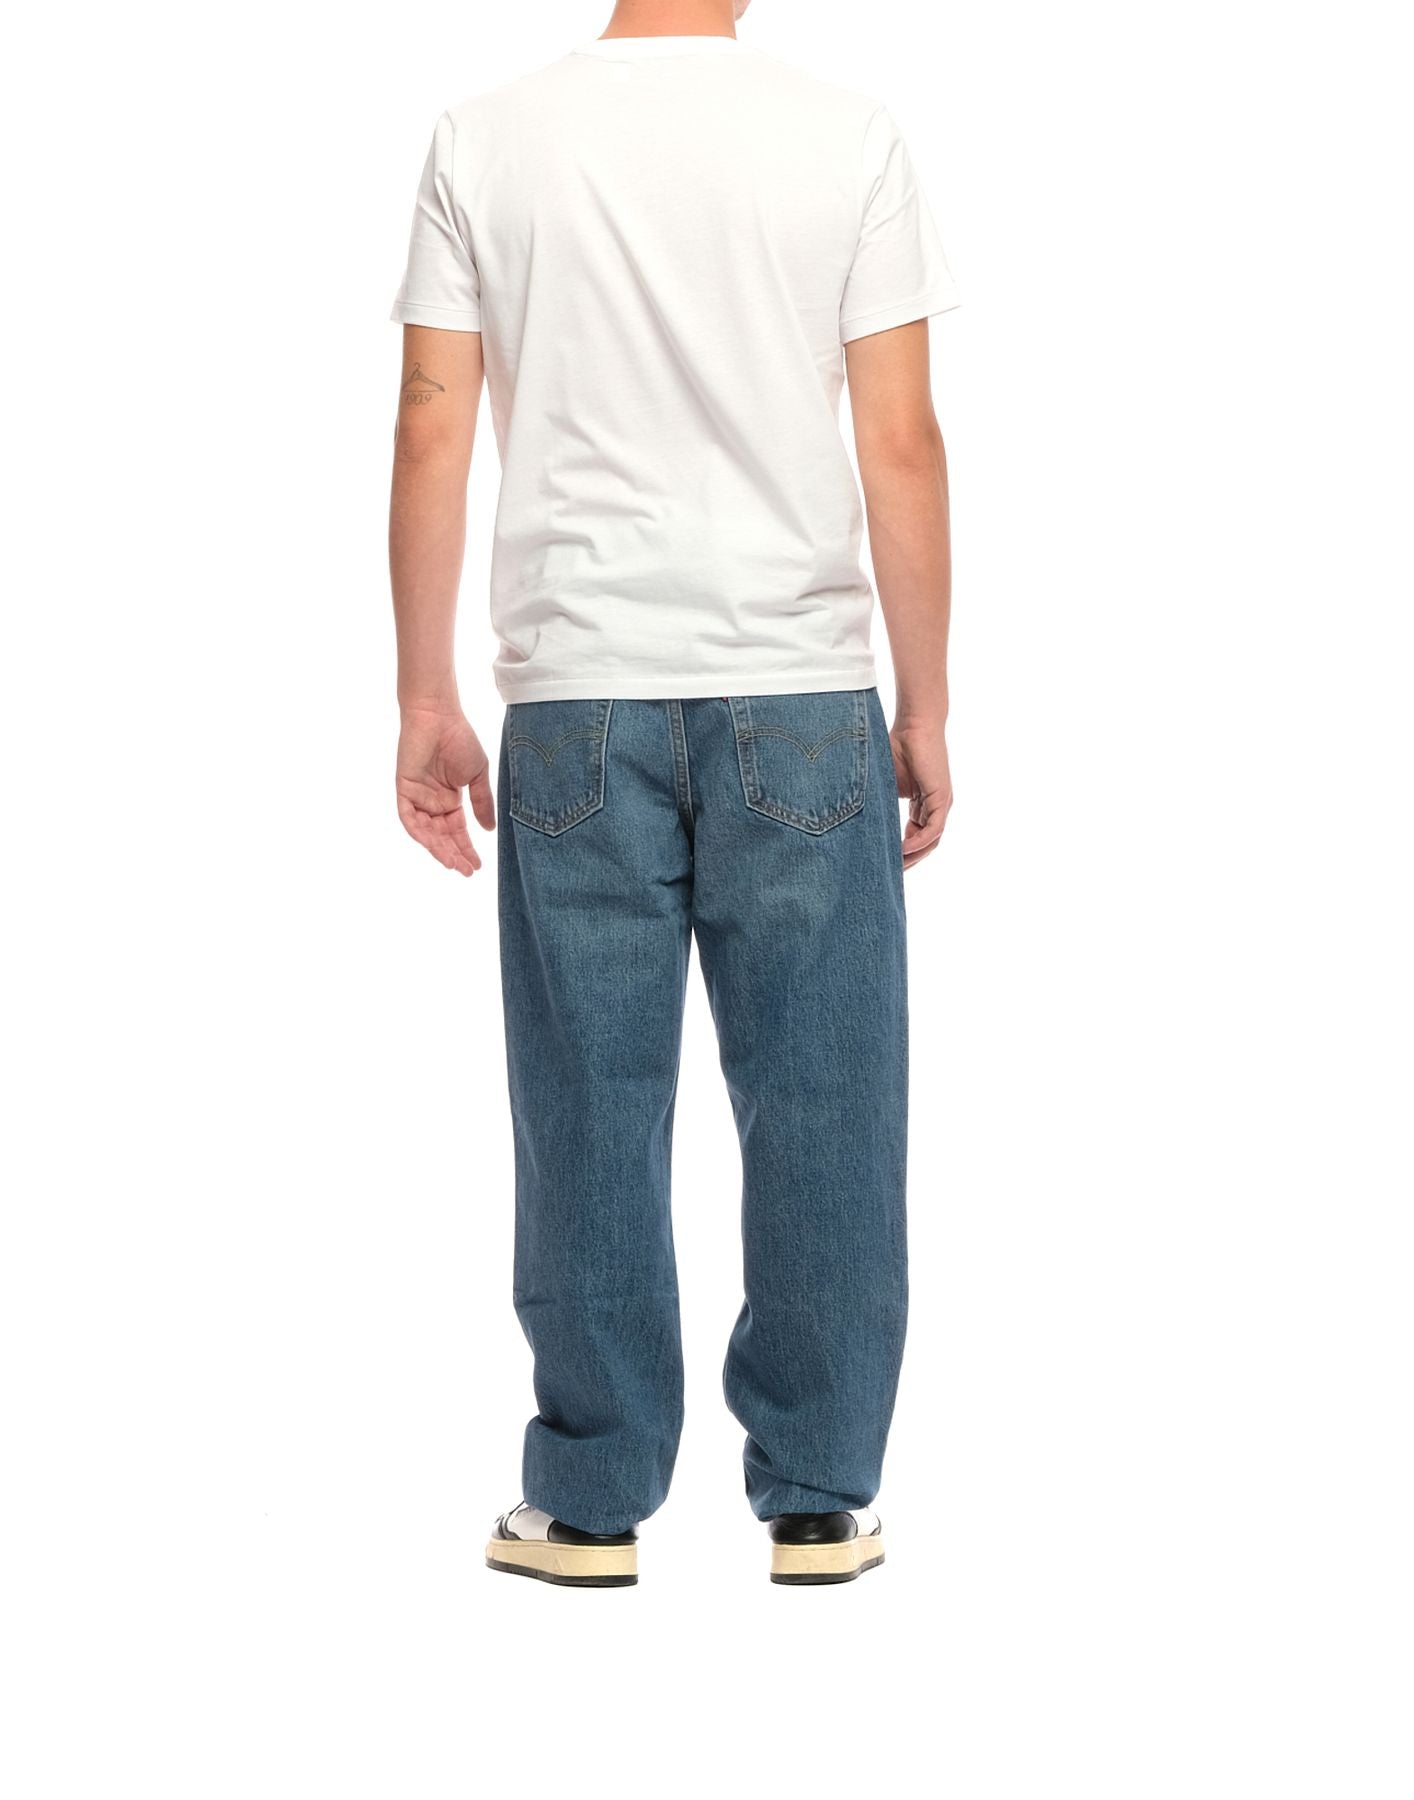 Jeans for men 29037 0050 MERRY AND BRIGHT Levi's